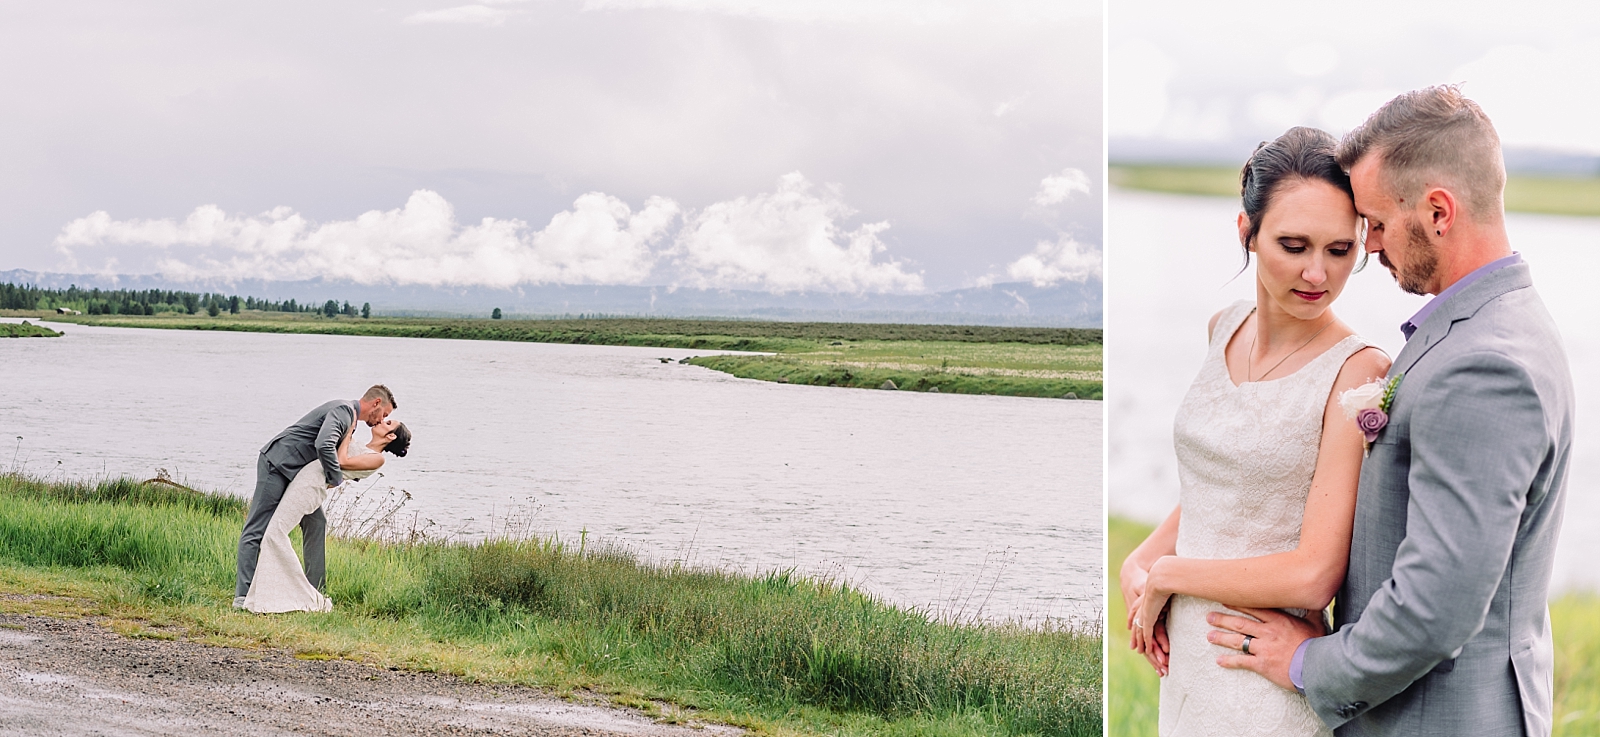 bride and groom by river wedding portraits